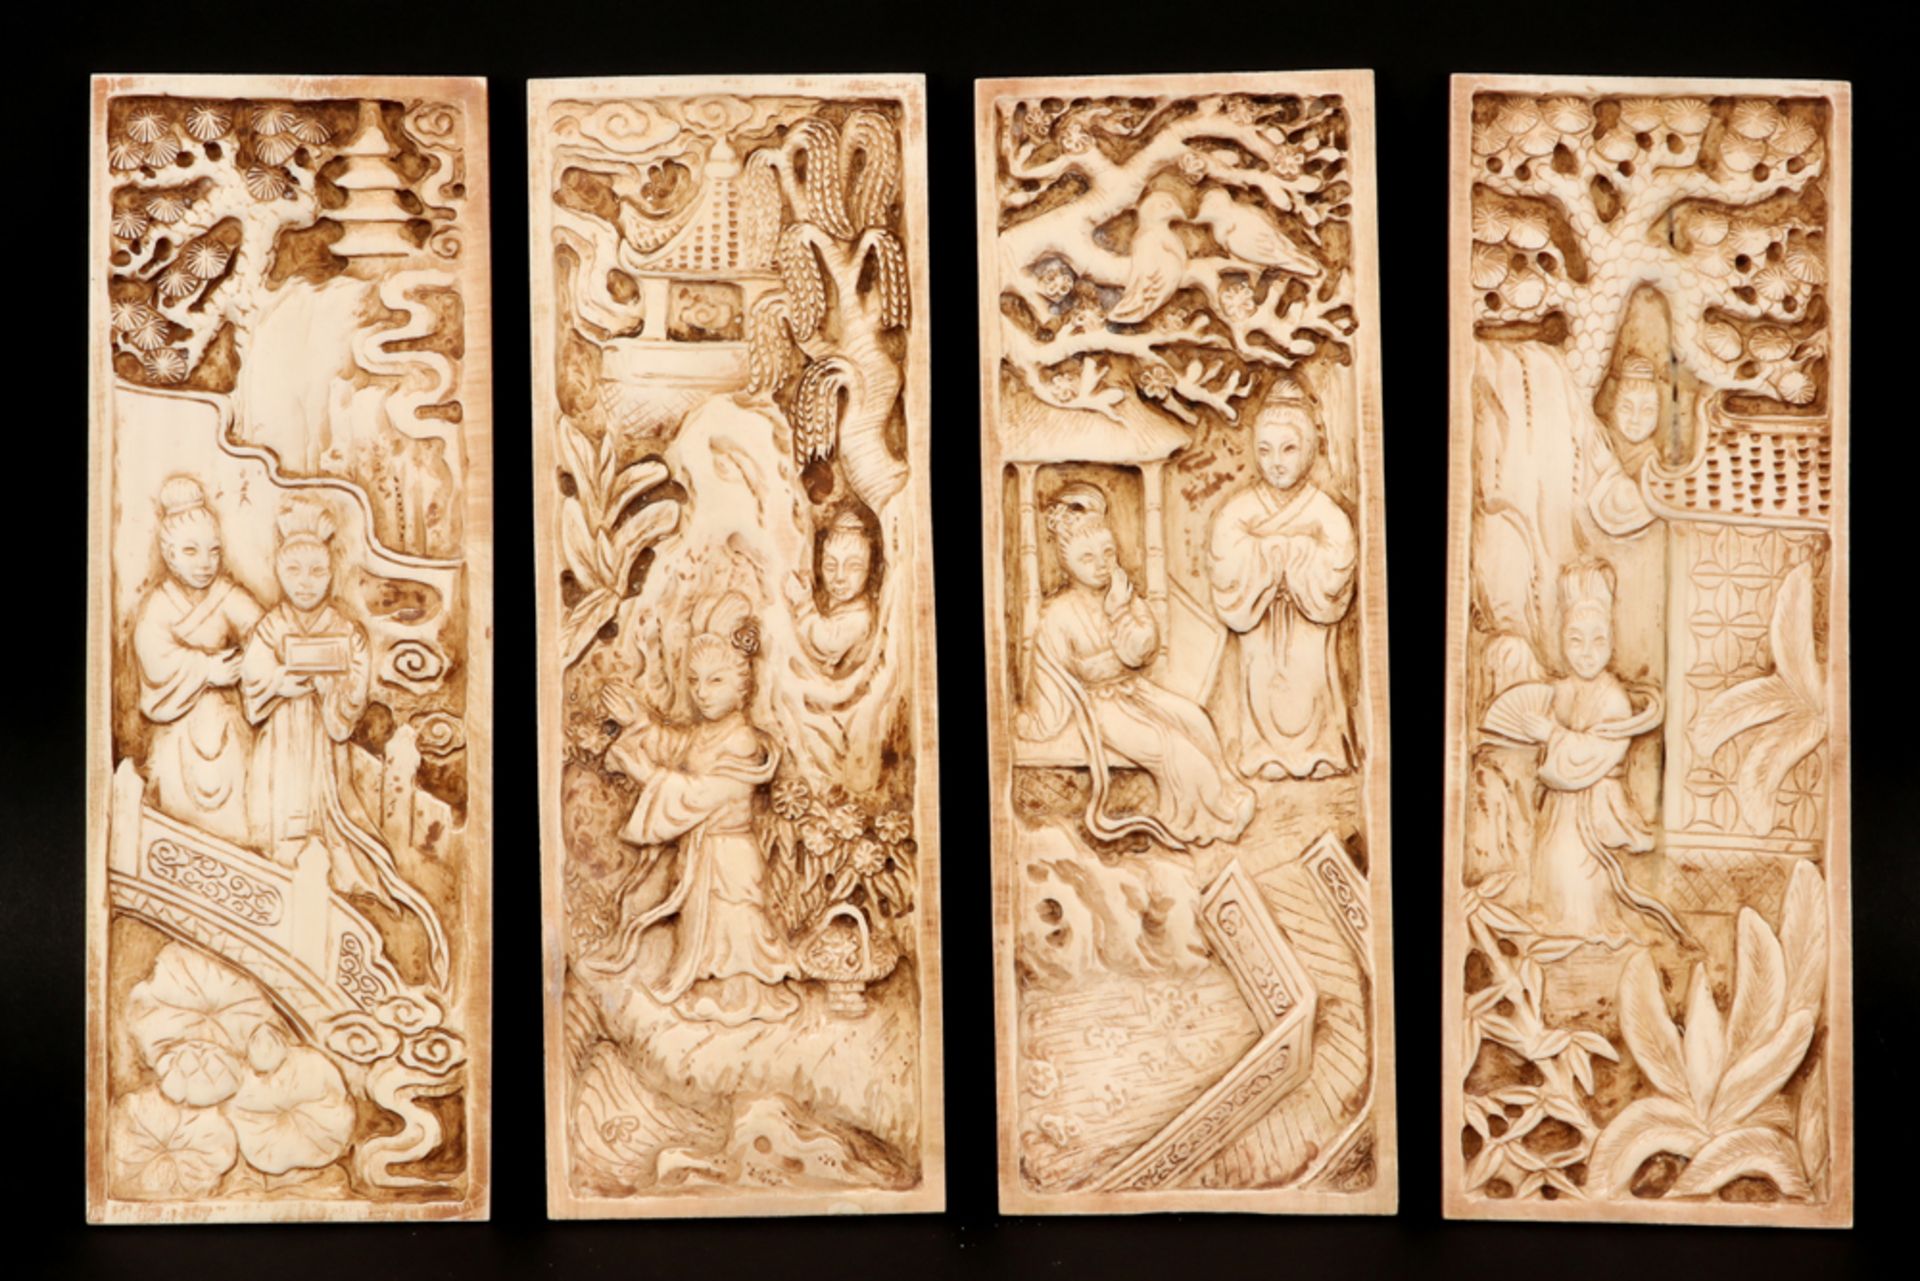 set of four Chinese plaques in ivory with courtly scenes about infatuation - bought in the '60s in